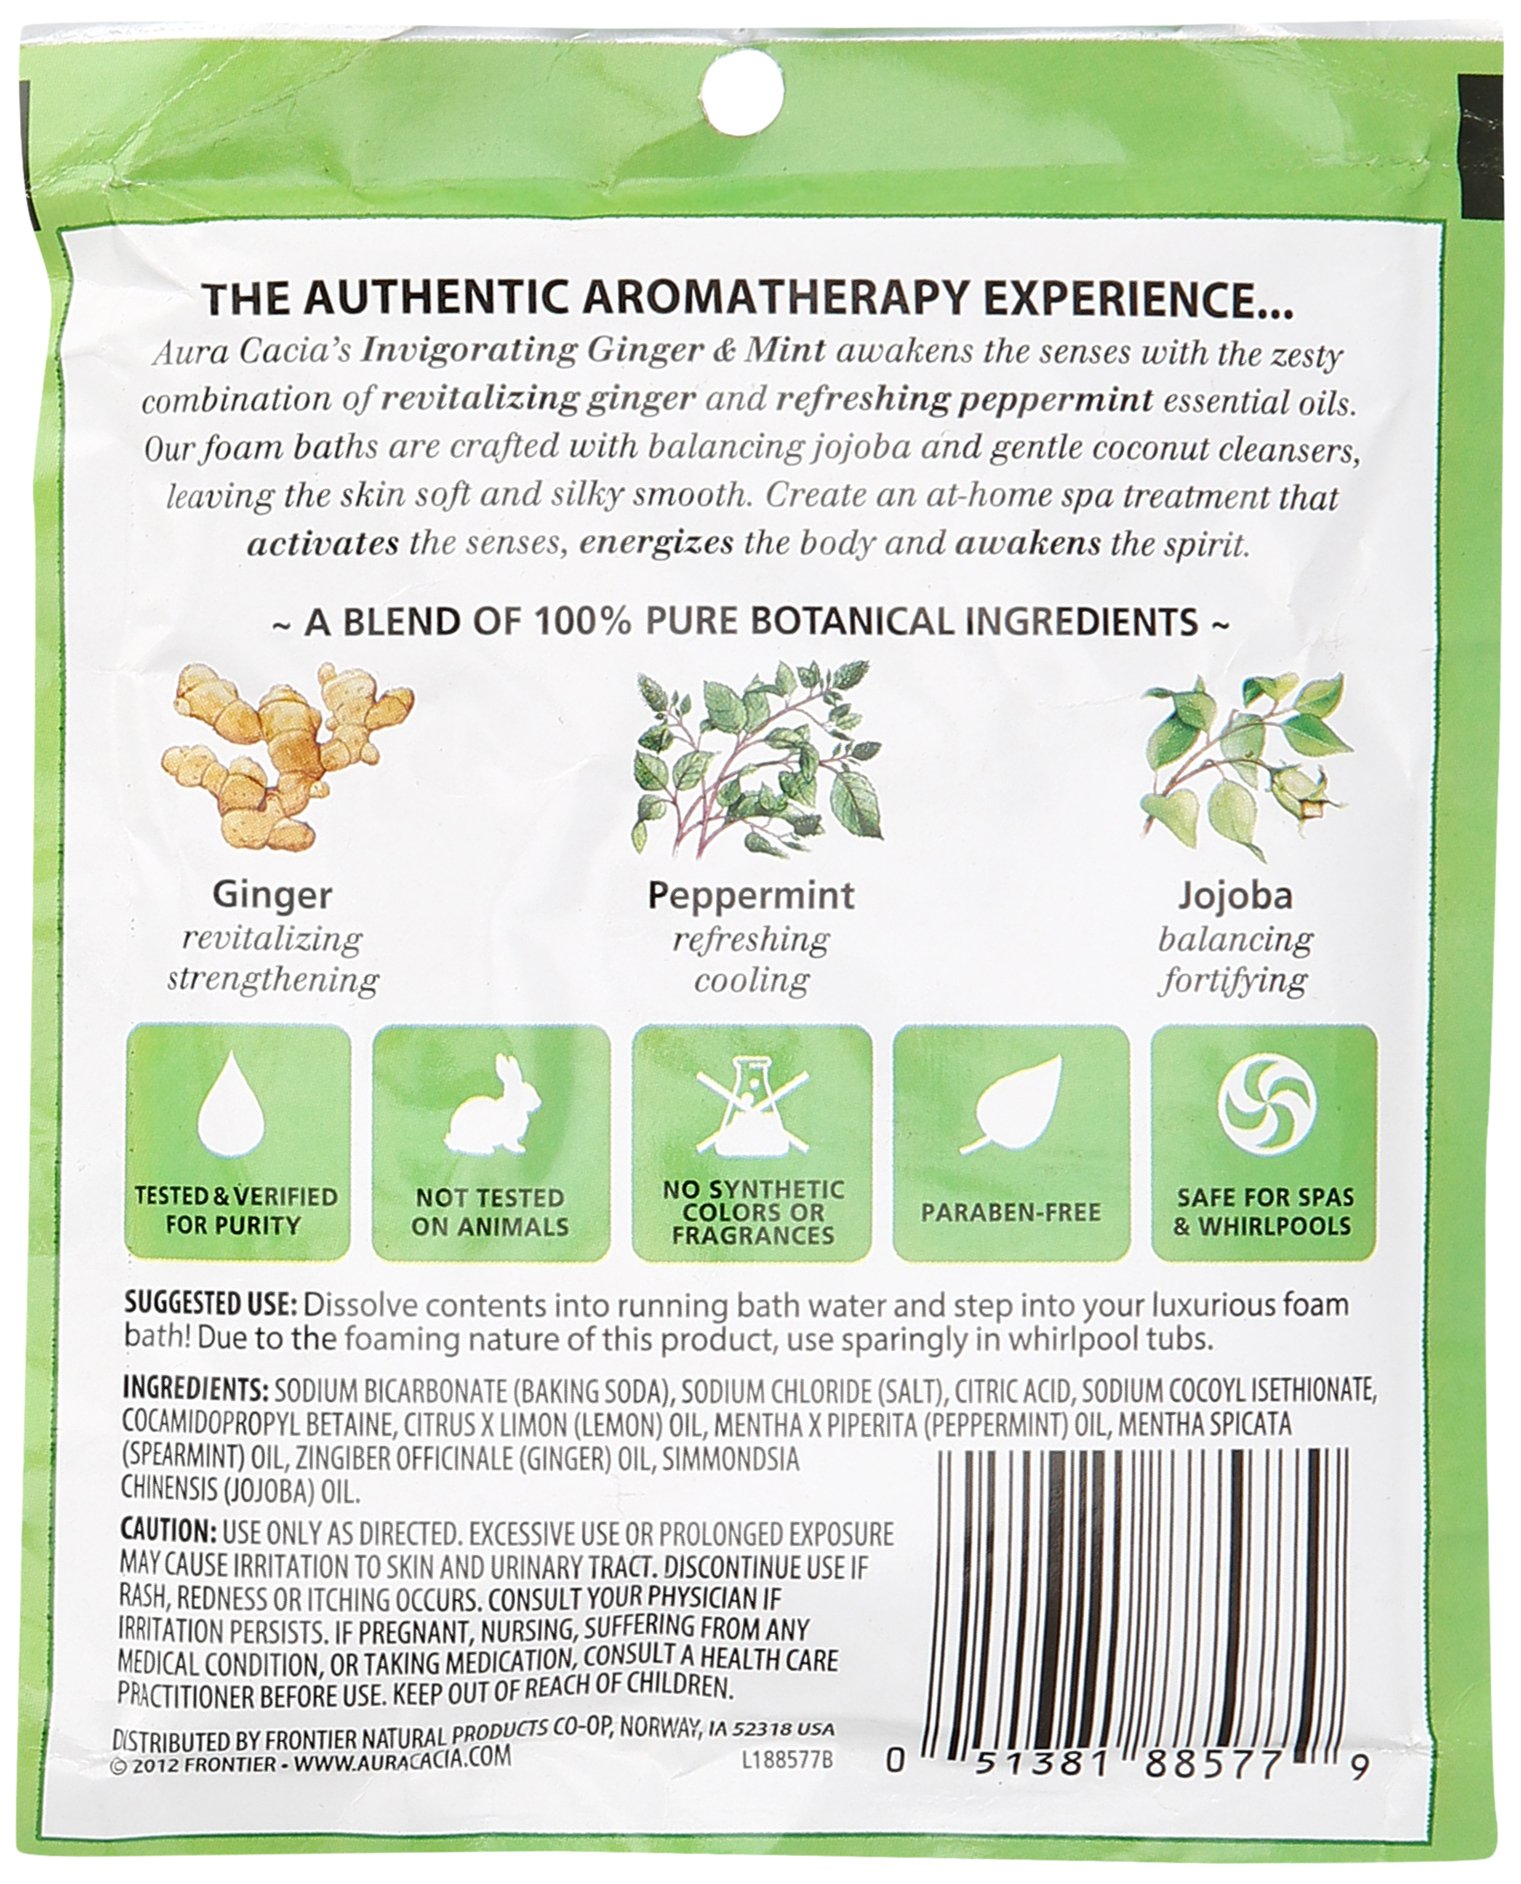 Aura Cacia Aromatherapy Foam Bath, Invigorating Ginger and Mint, 2.5 ounce packet (Pack of 3)